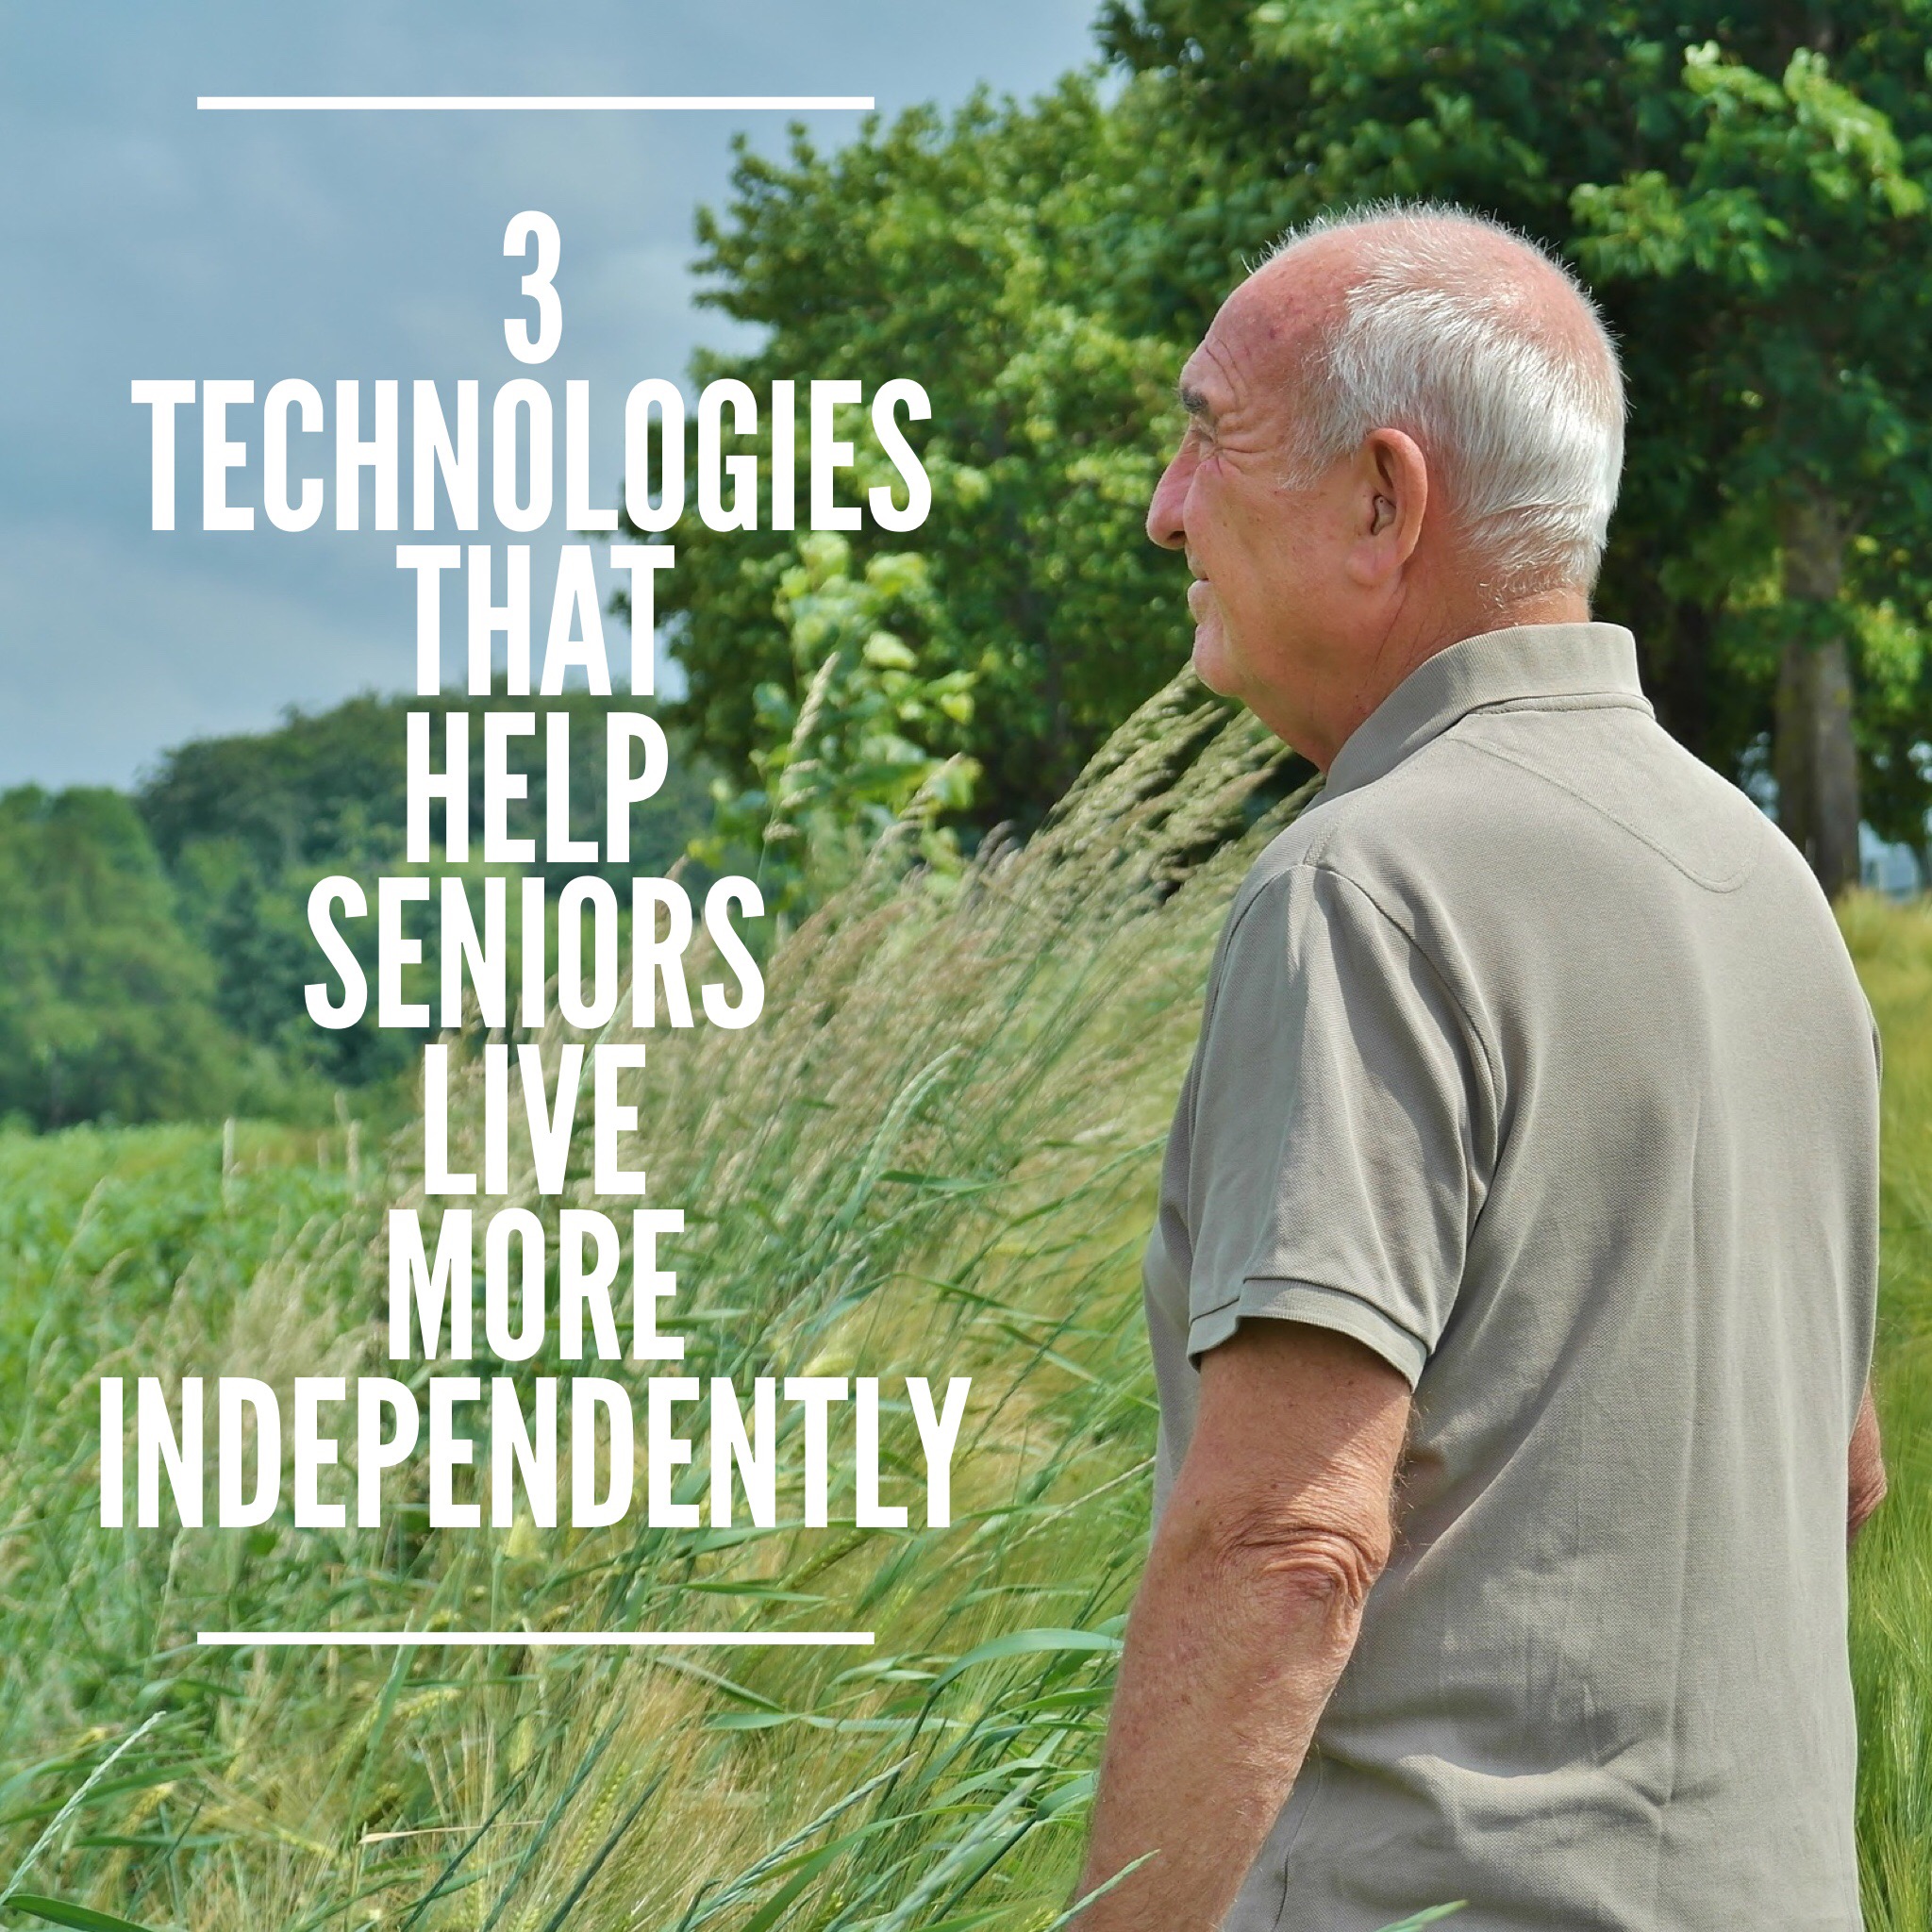 3 Types of Technology that Help Seniors Live More Independently